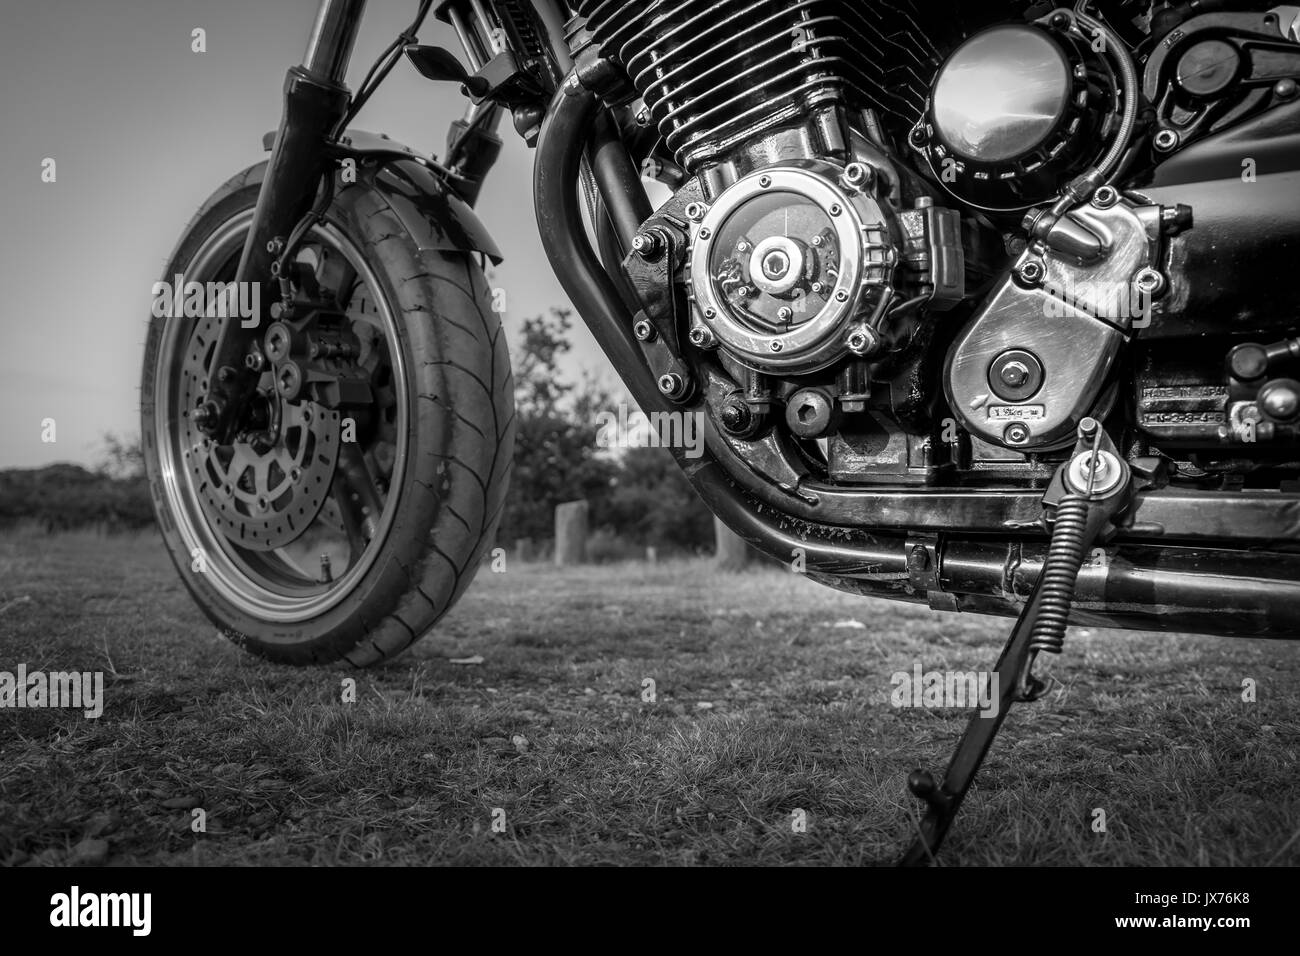 A close up shot of the engine of a custom made motorbike in black and white (chopper) Stock Photo